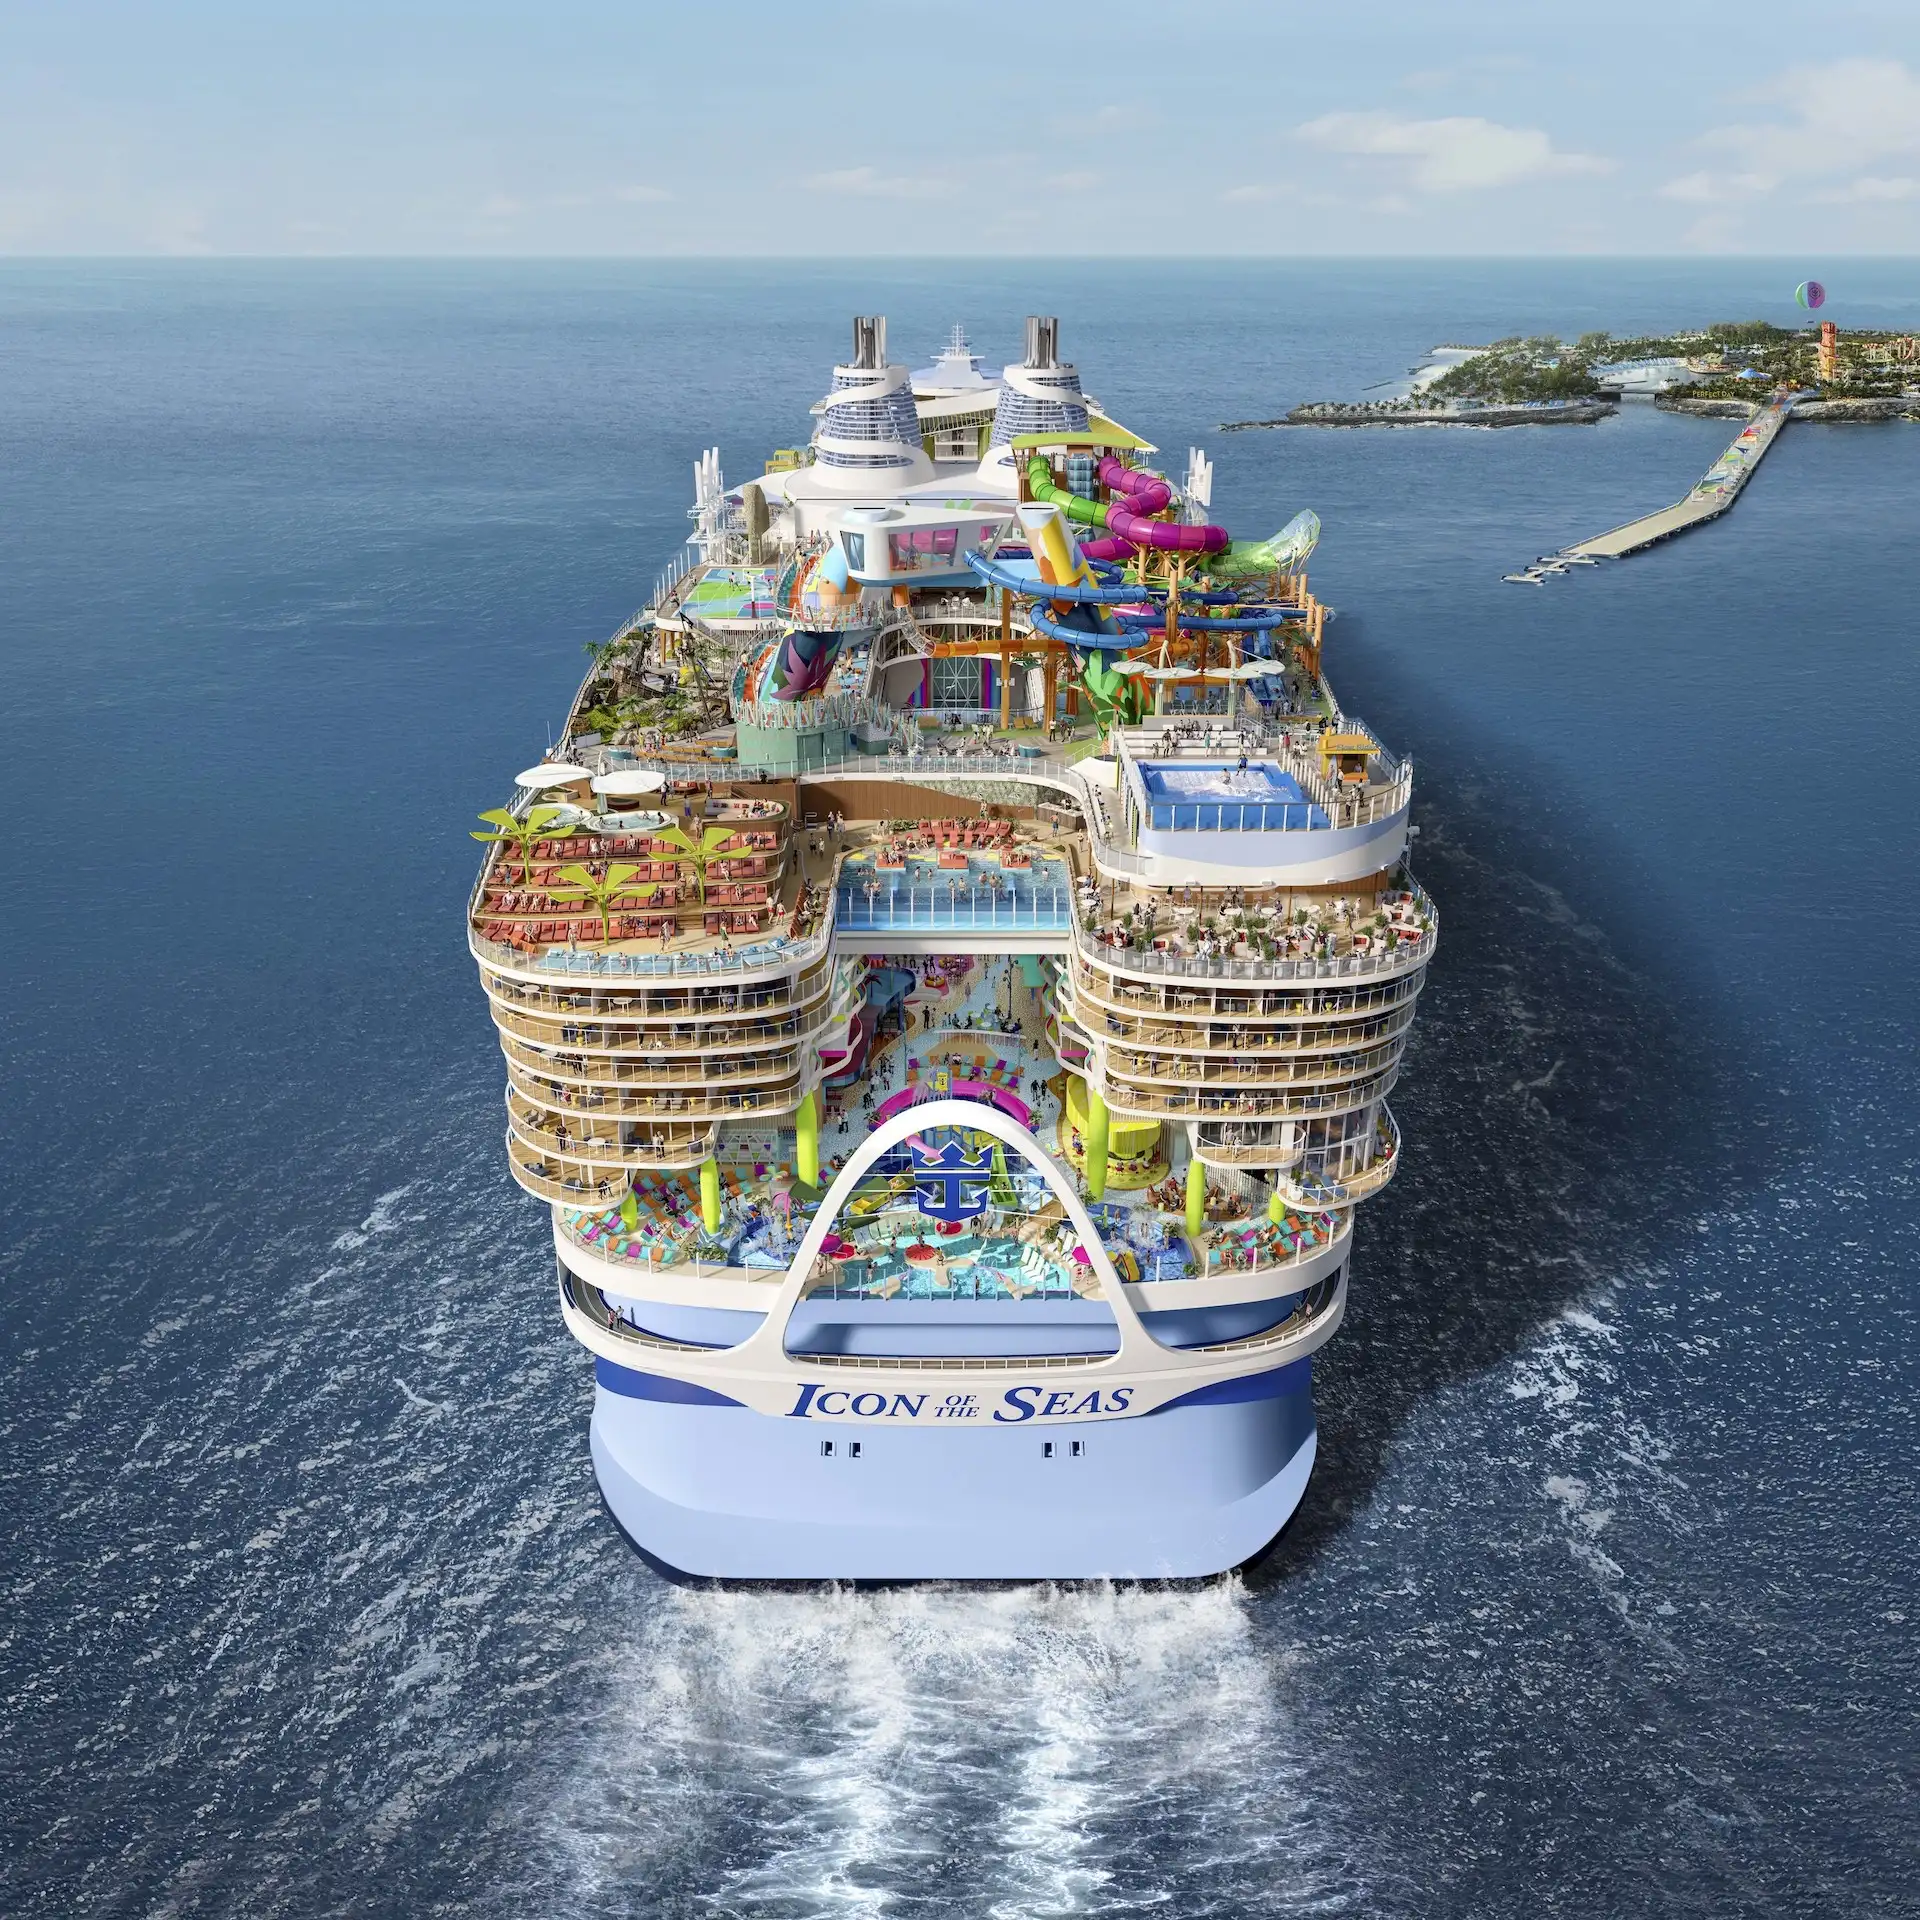 Icon of The Seas, Royal Caribbean's world's largest cruise ship